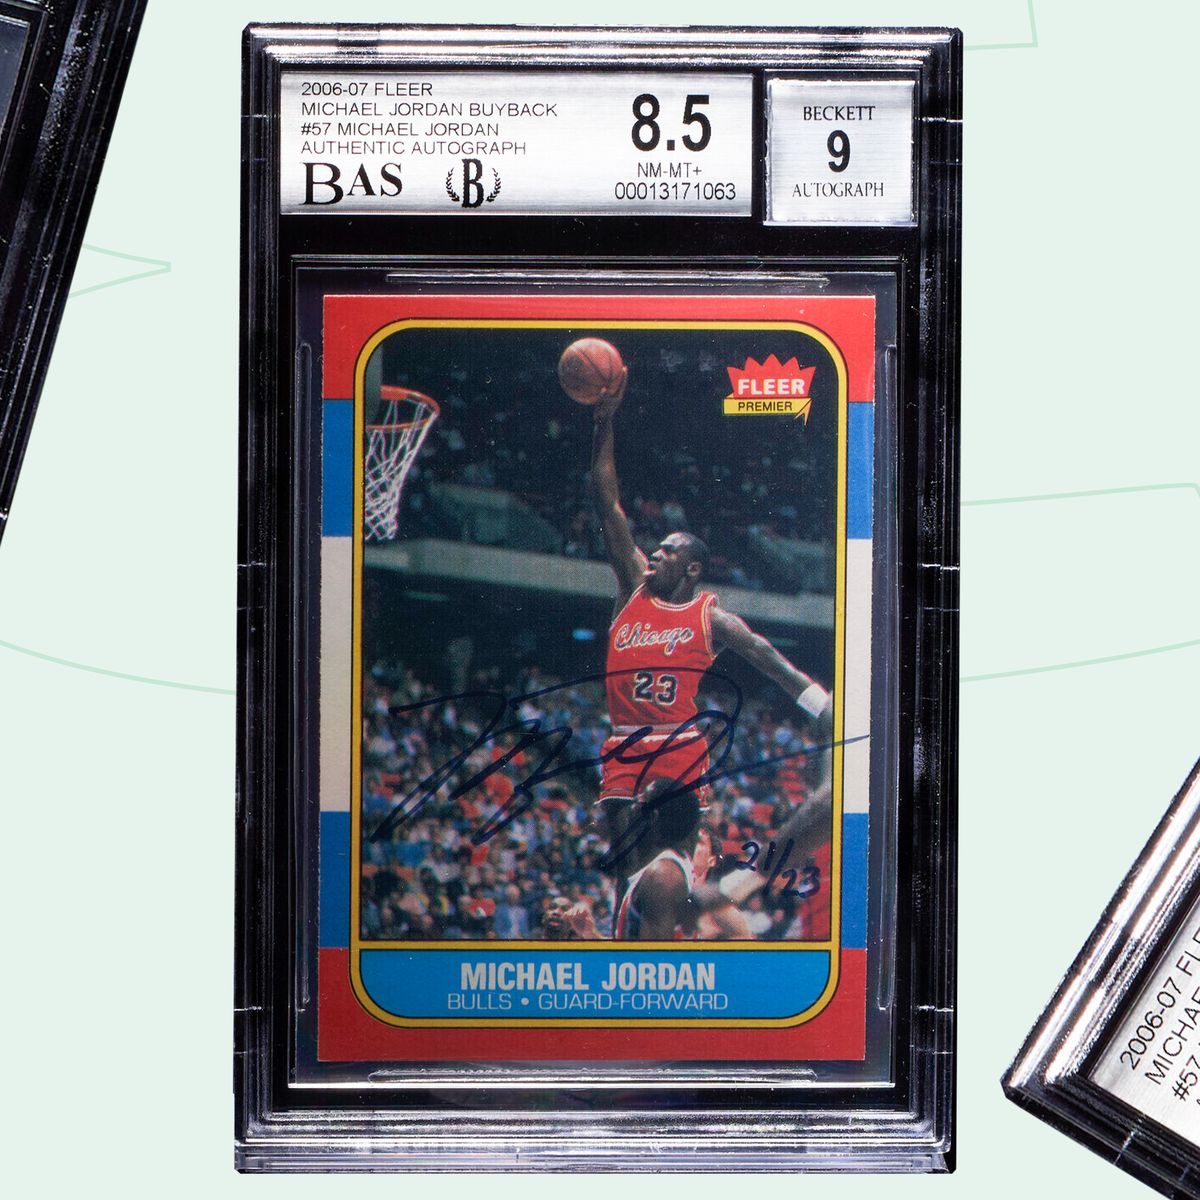 Signed Michael Jordan rookie card sells for record $1 million at Christie's  - Sports Collectors Digest